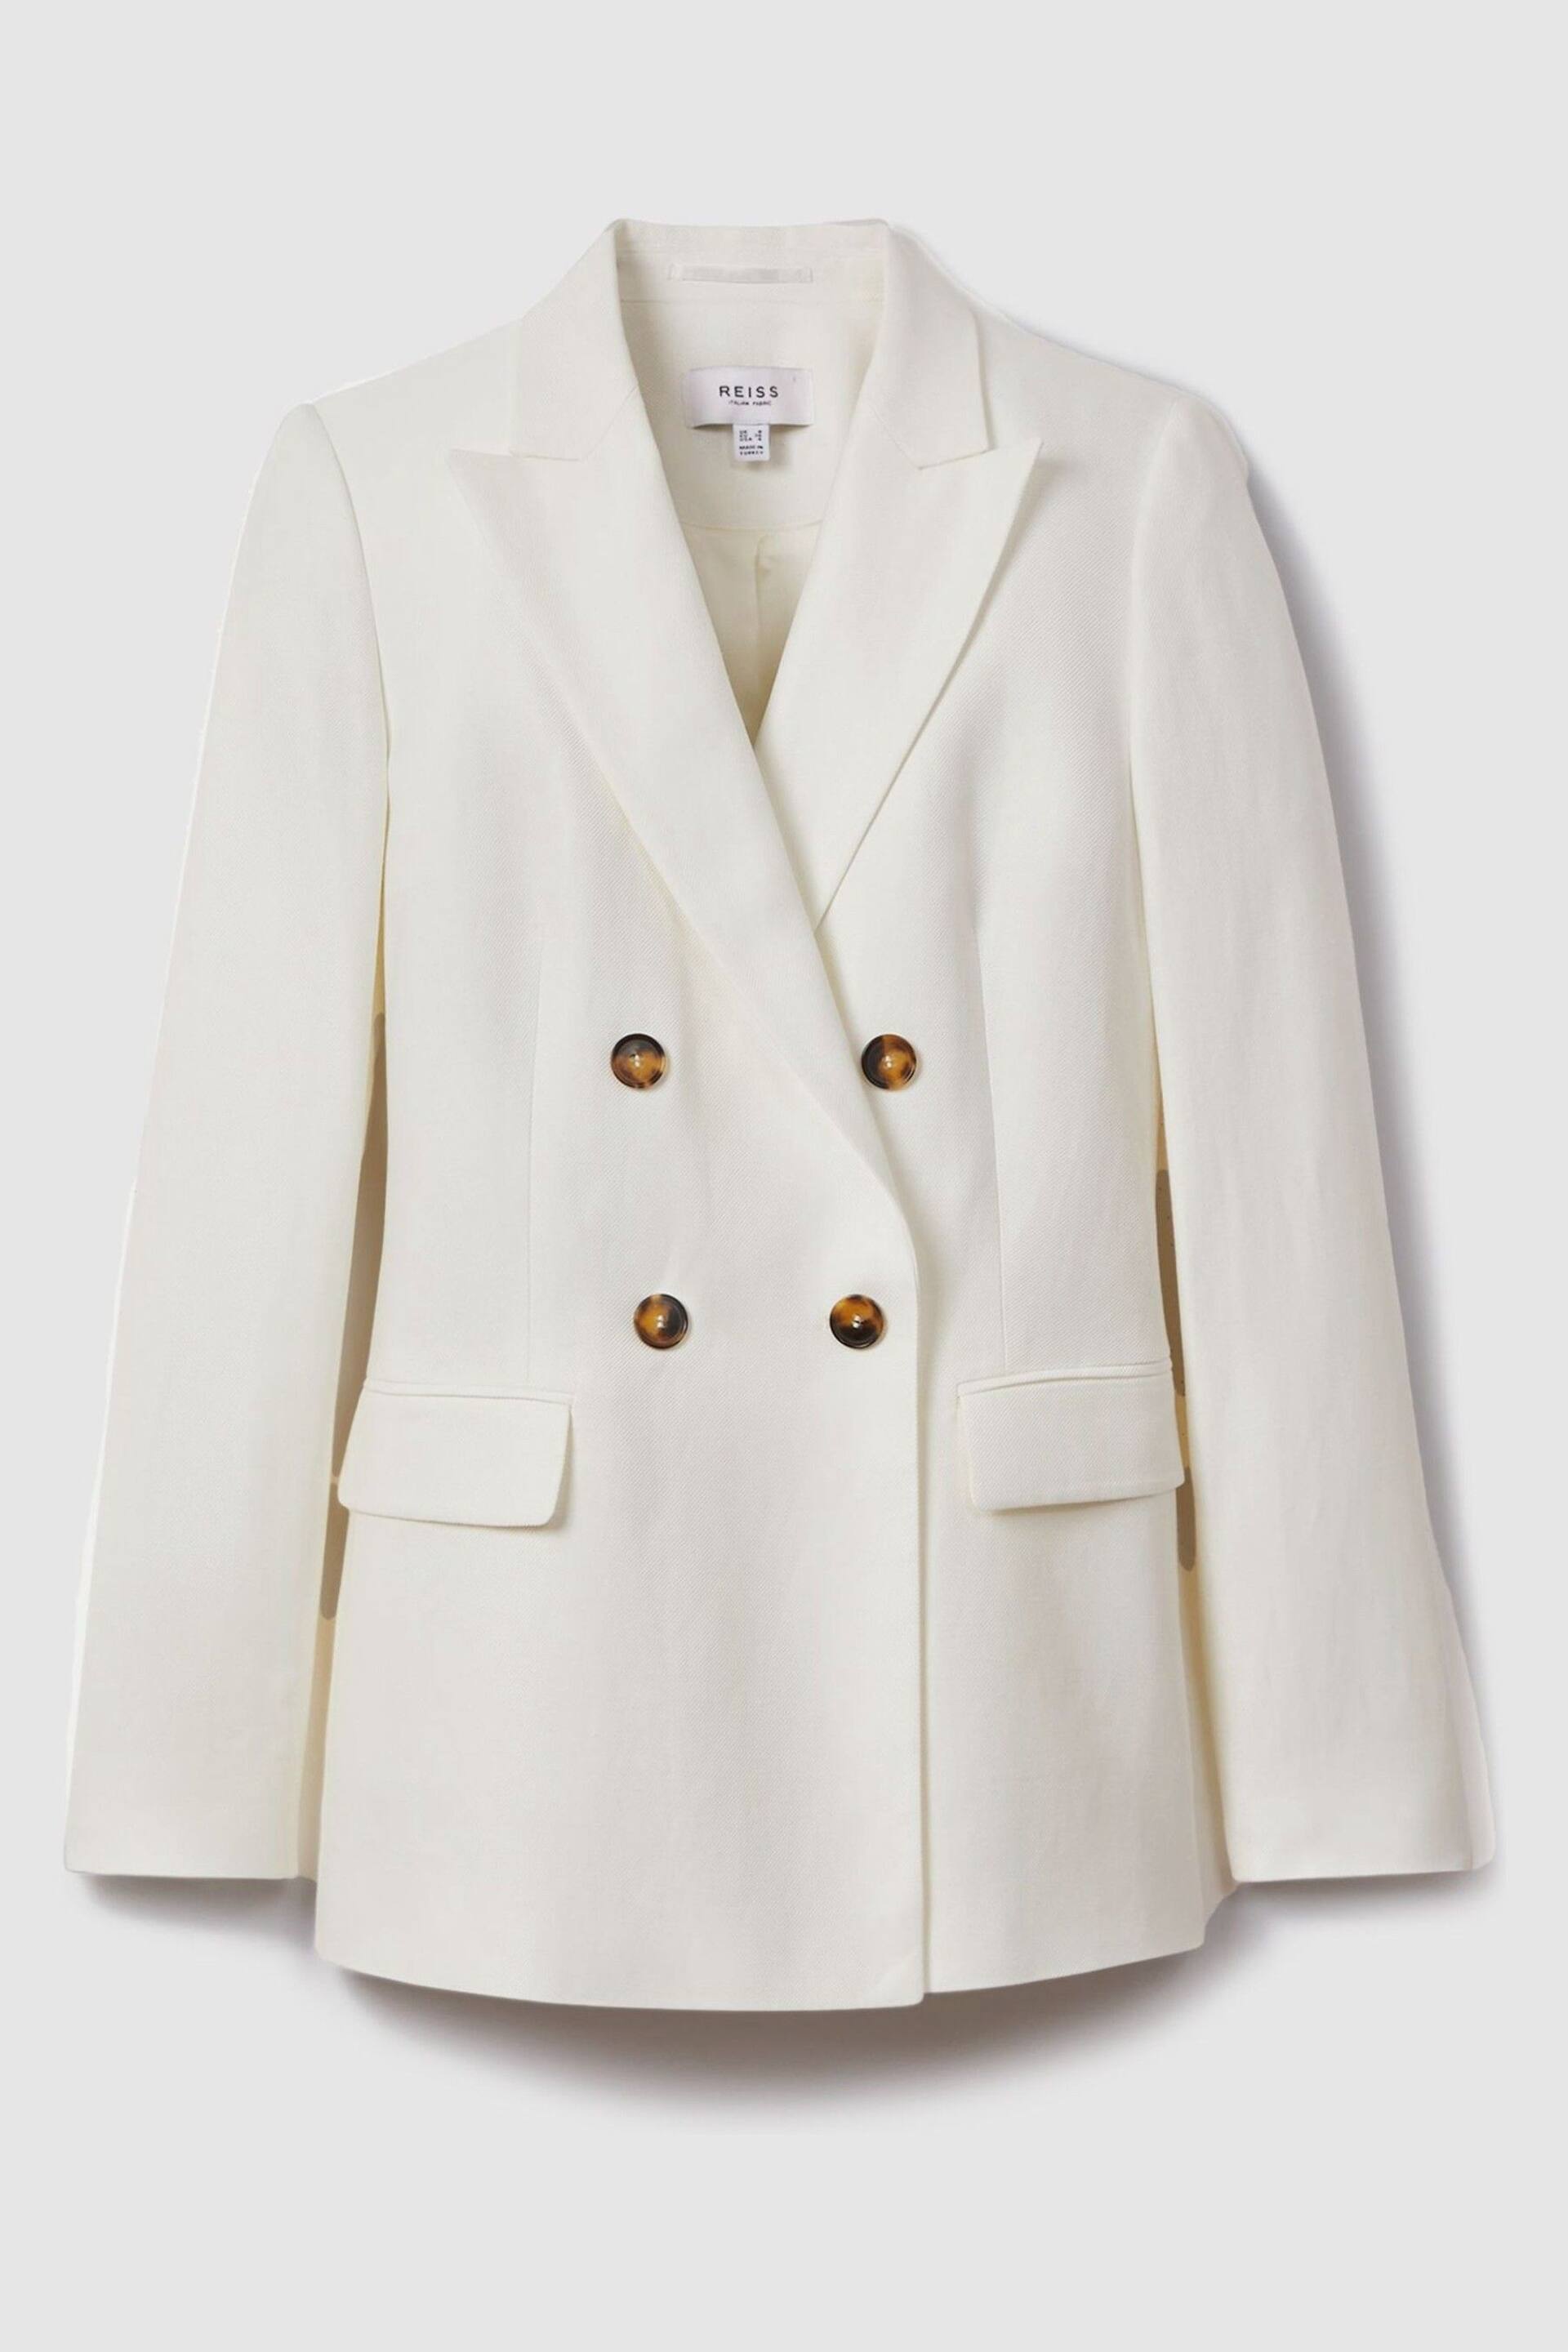 Reiss White Lori Viscose-Linen Double Breasted Suit Blazer - Image 2 of 7